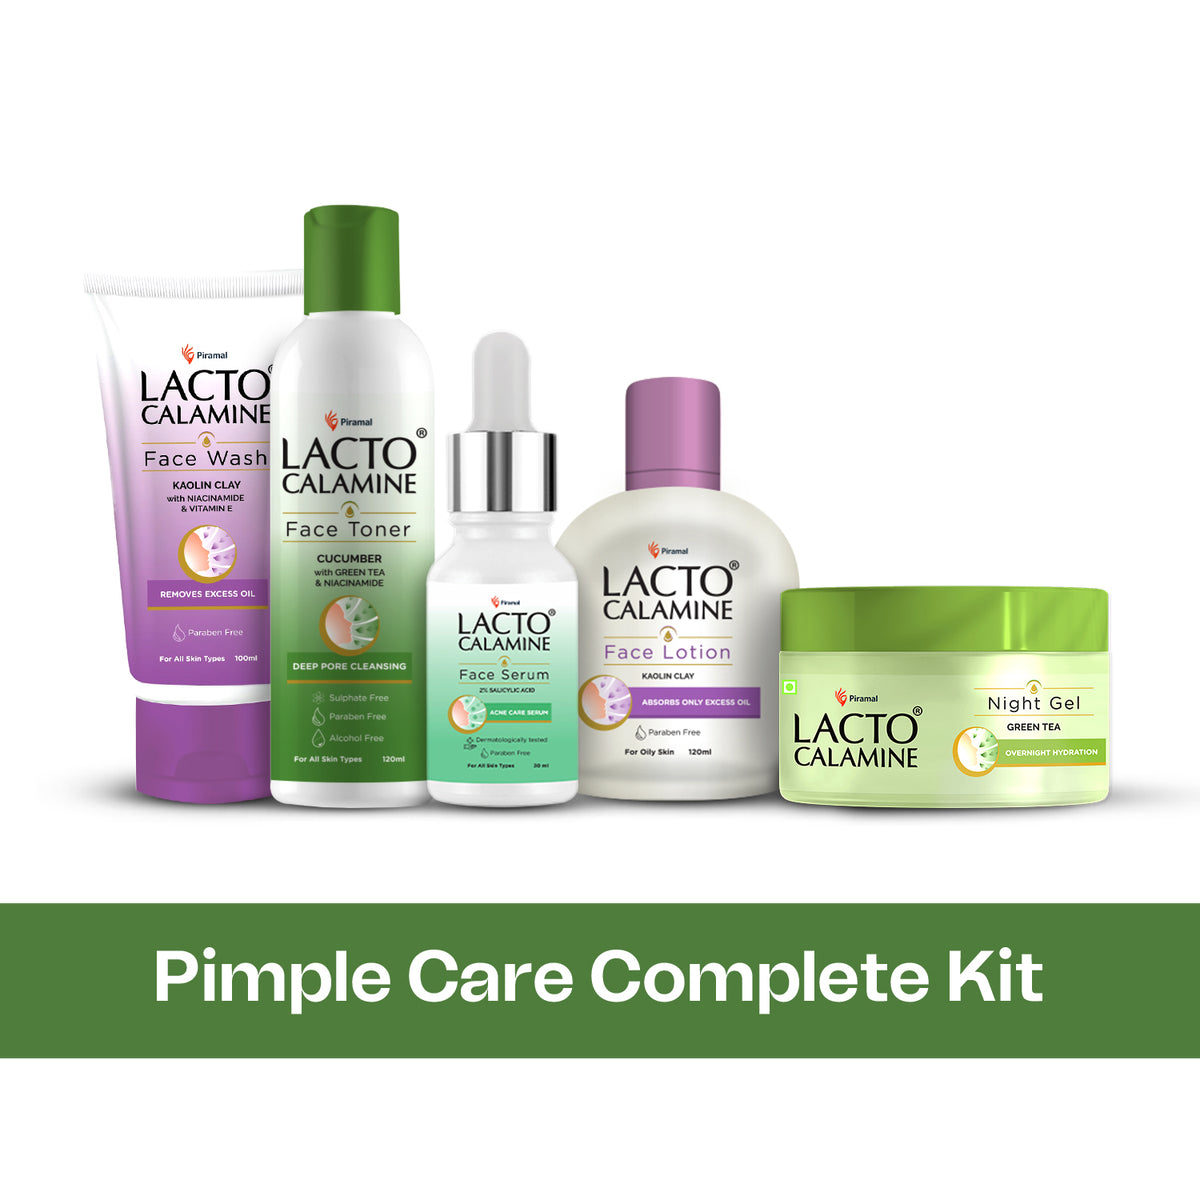 Lacto Calamine Pimple Care Complete Kit-Combo of 5 for Women | acne-care for Oily Skin | Toner, Lotion, Serum and Night Gel